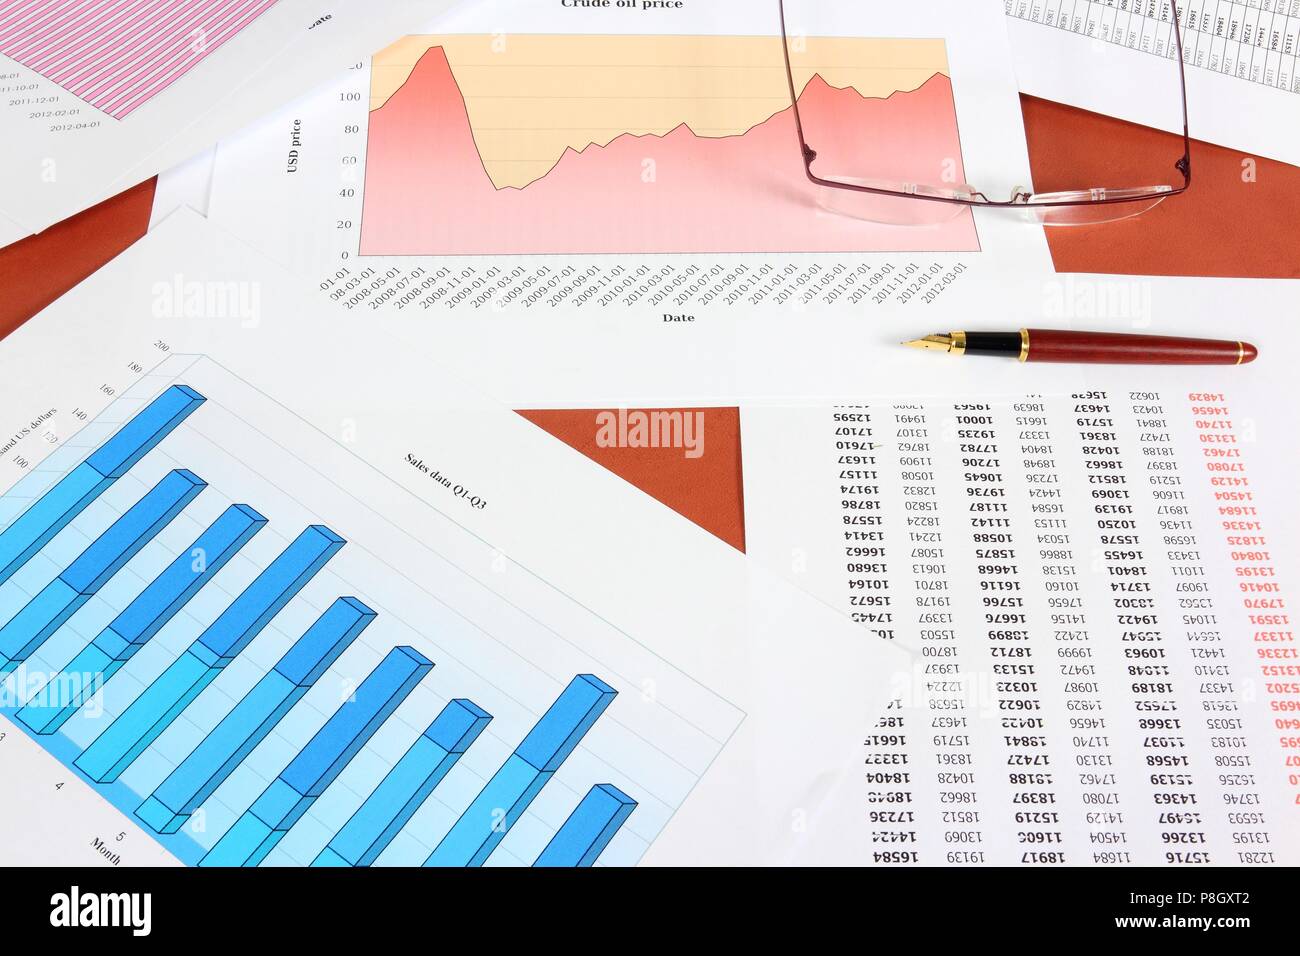 Business objects - oil industry financial concept with crude oil price graph. Stock Photo